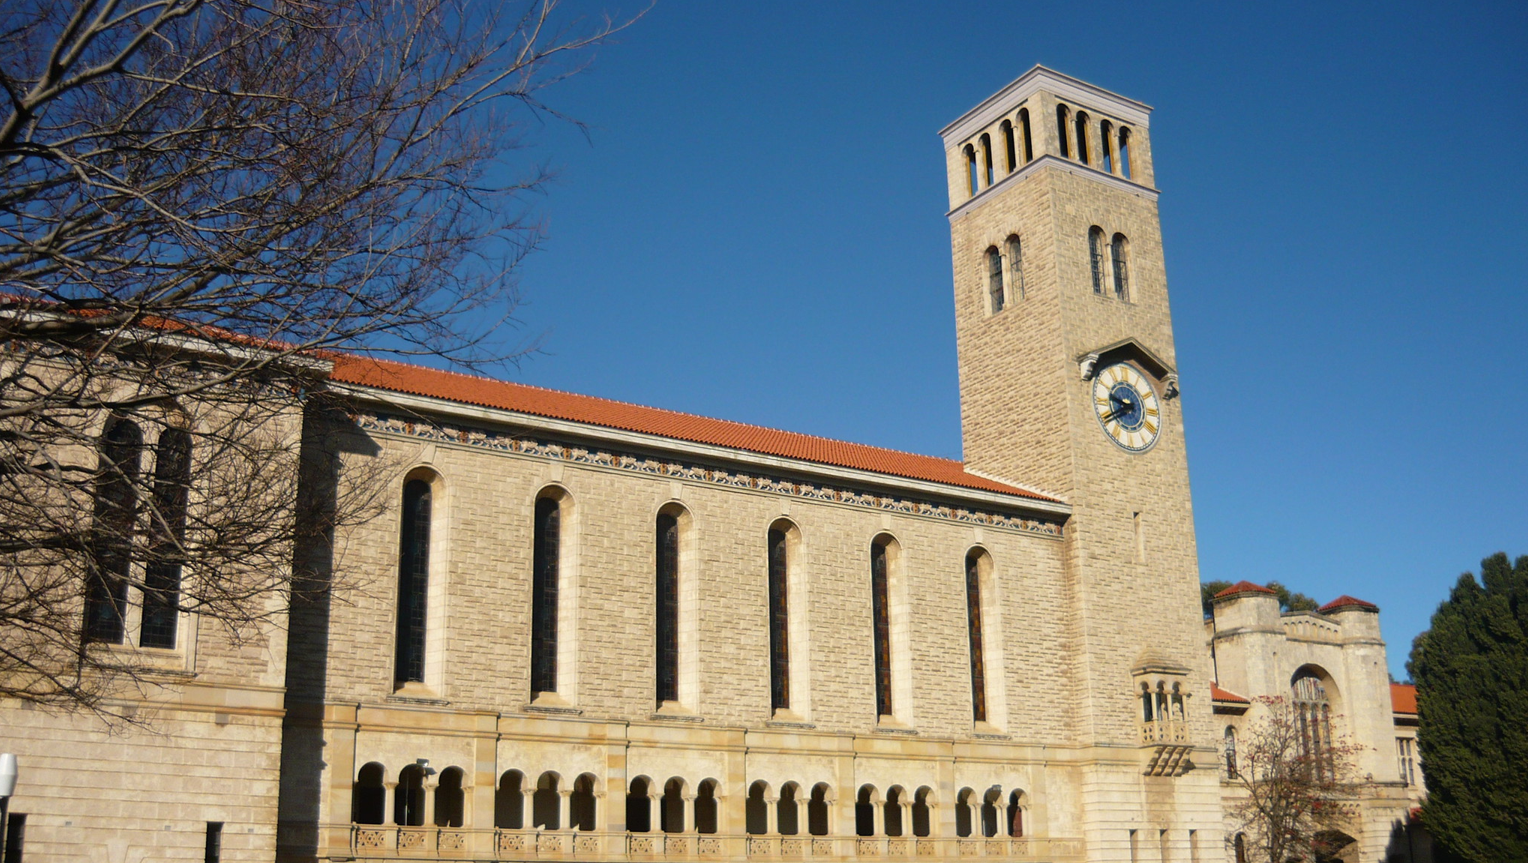 Winthrop Hall at The University of Western Australia, Perth. Source: Stephen Dann on Flickr